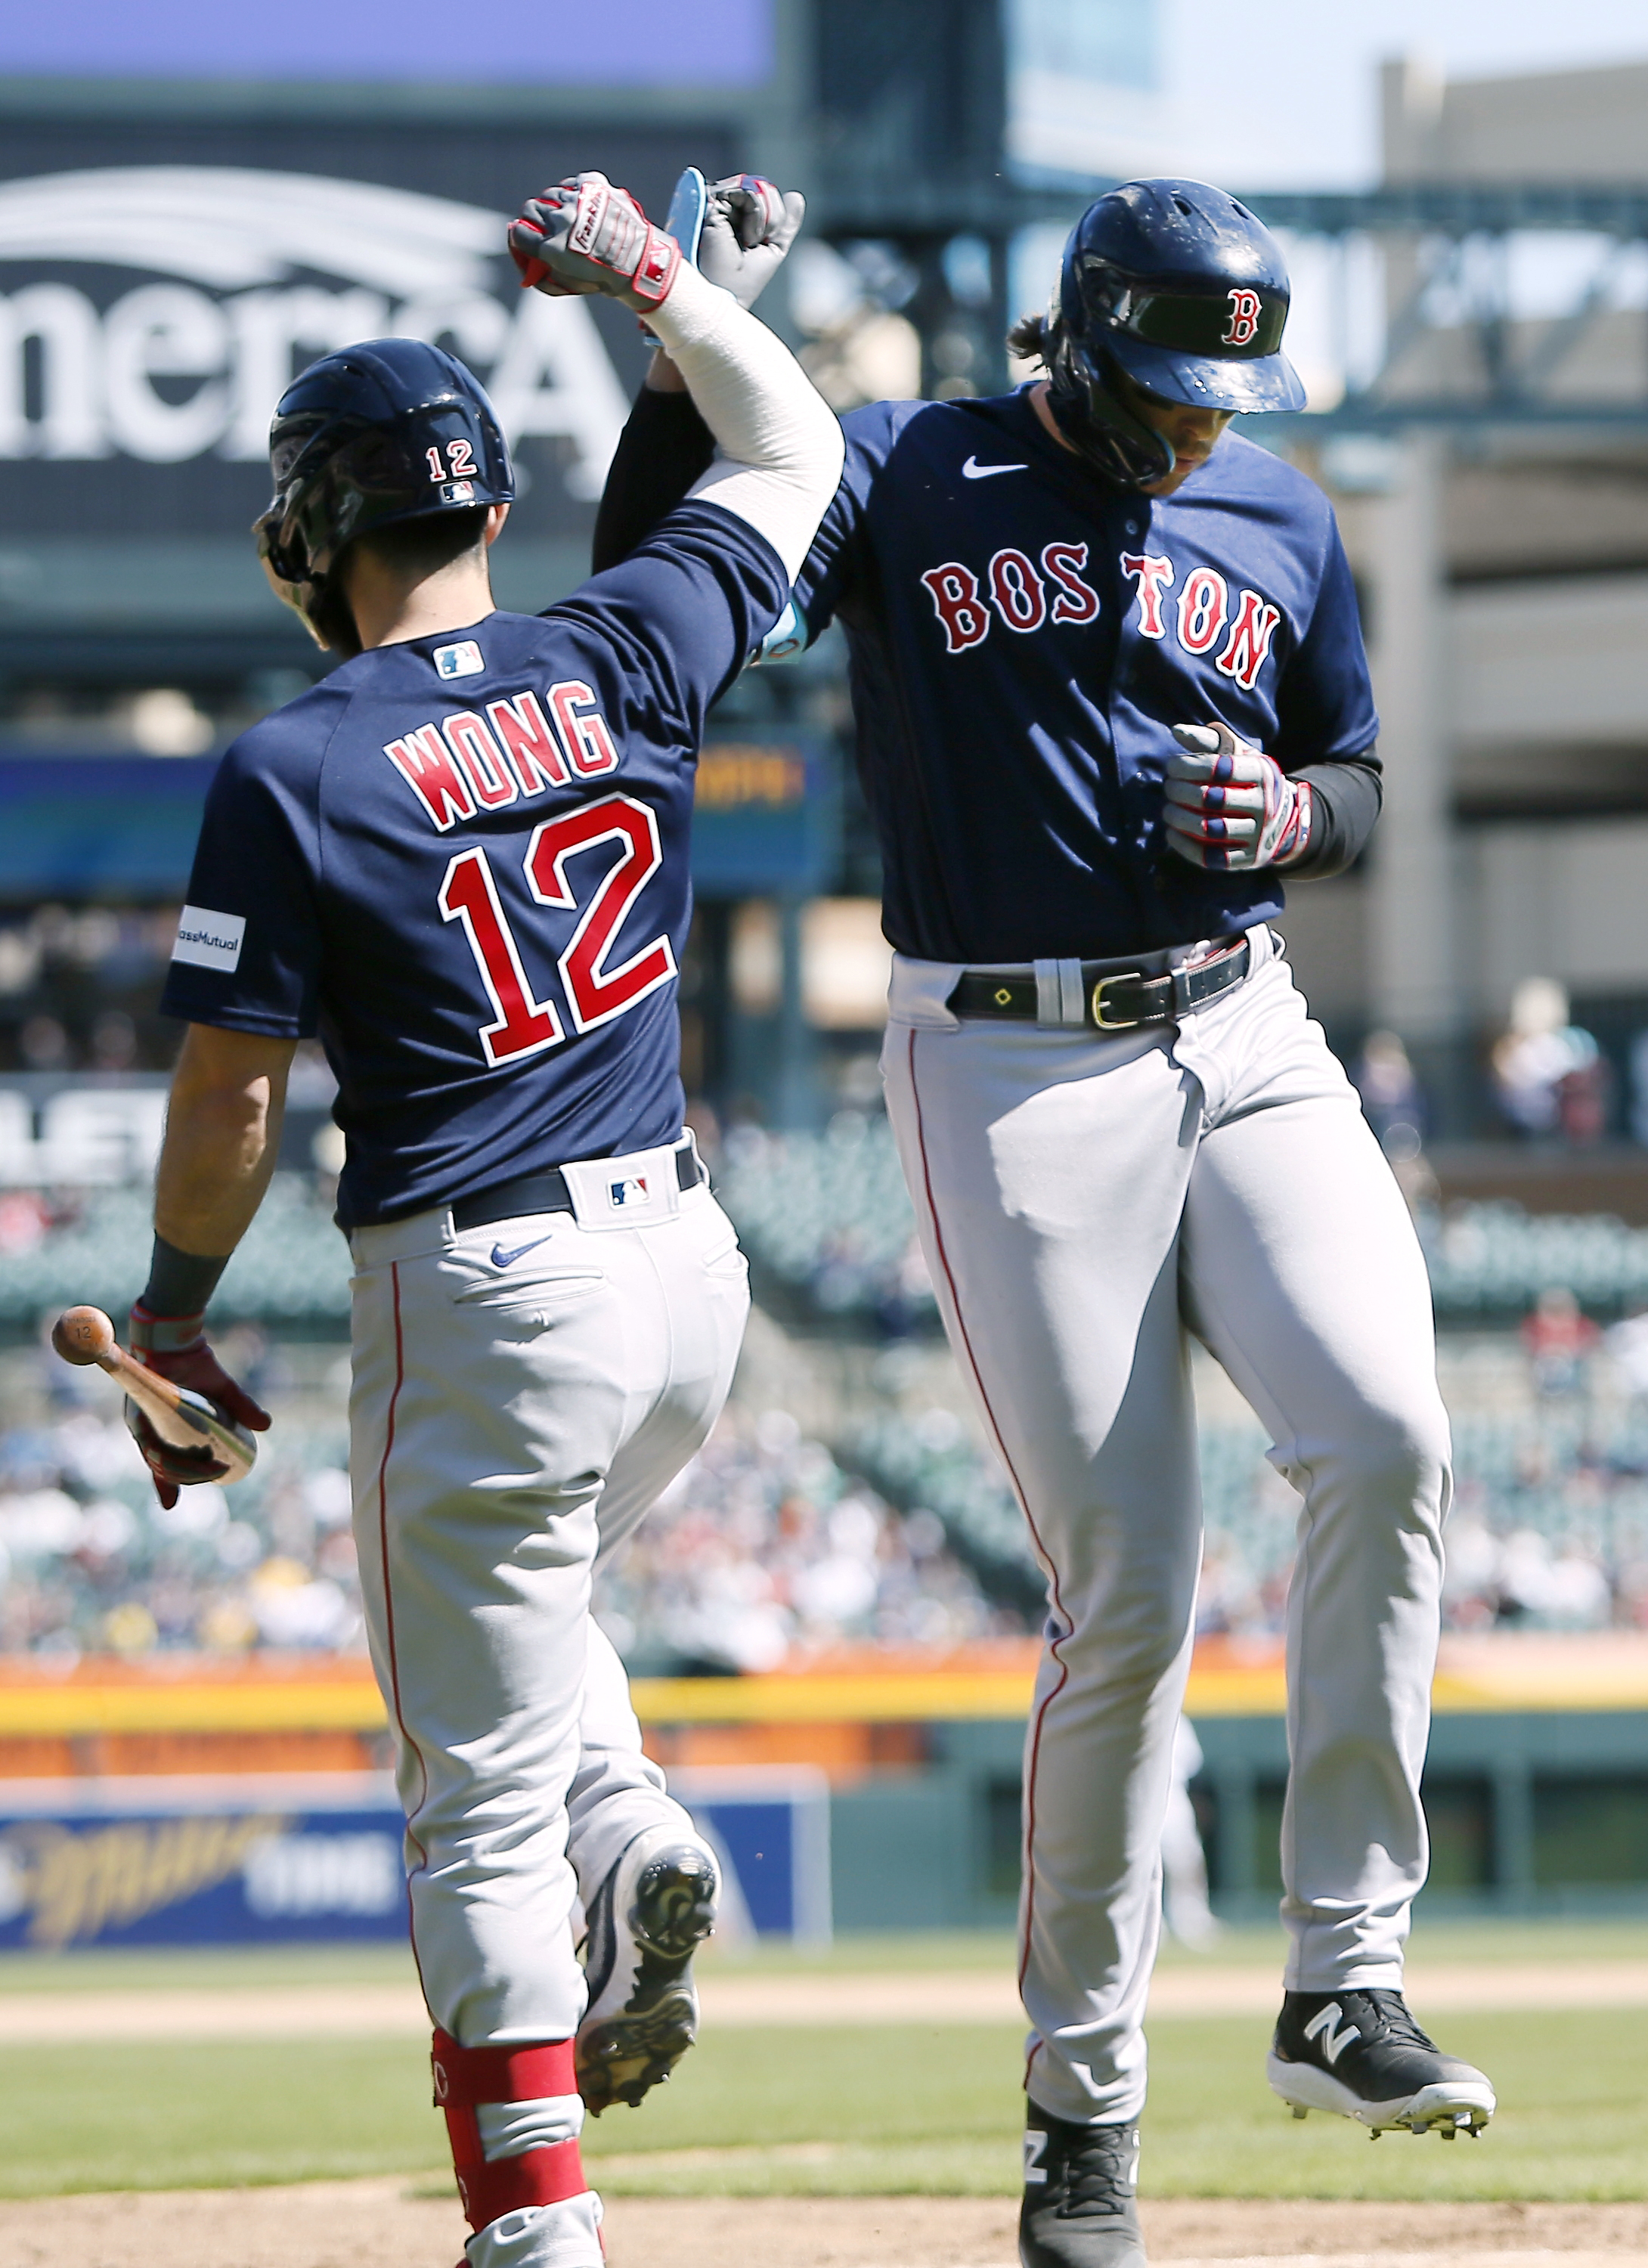 Red Sox rebound from loss to pick up series win over Tigers